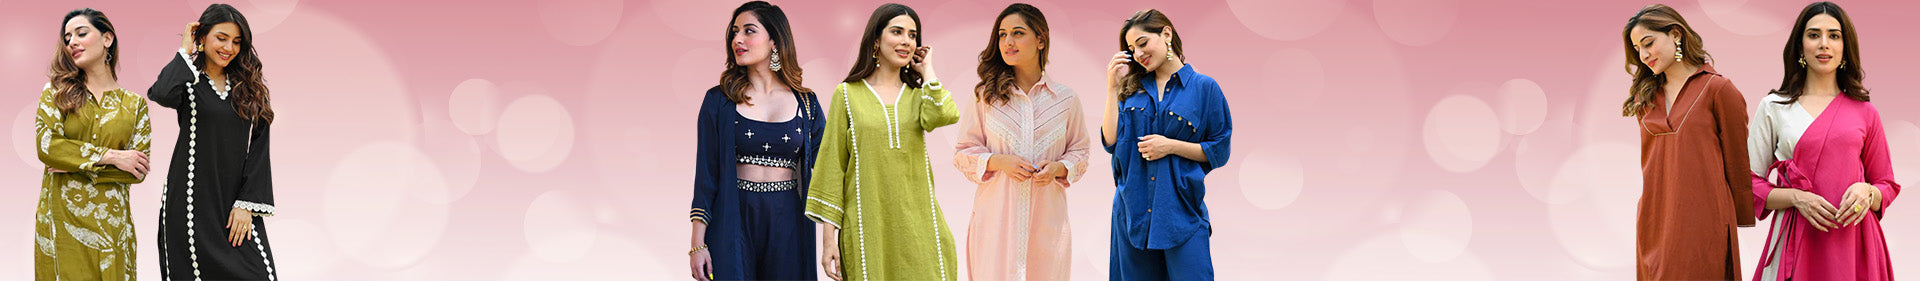 Buy Stylish Indo-western Co-Ord Sets for Women